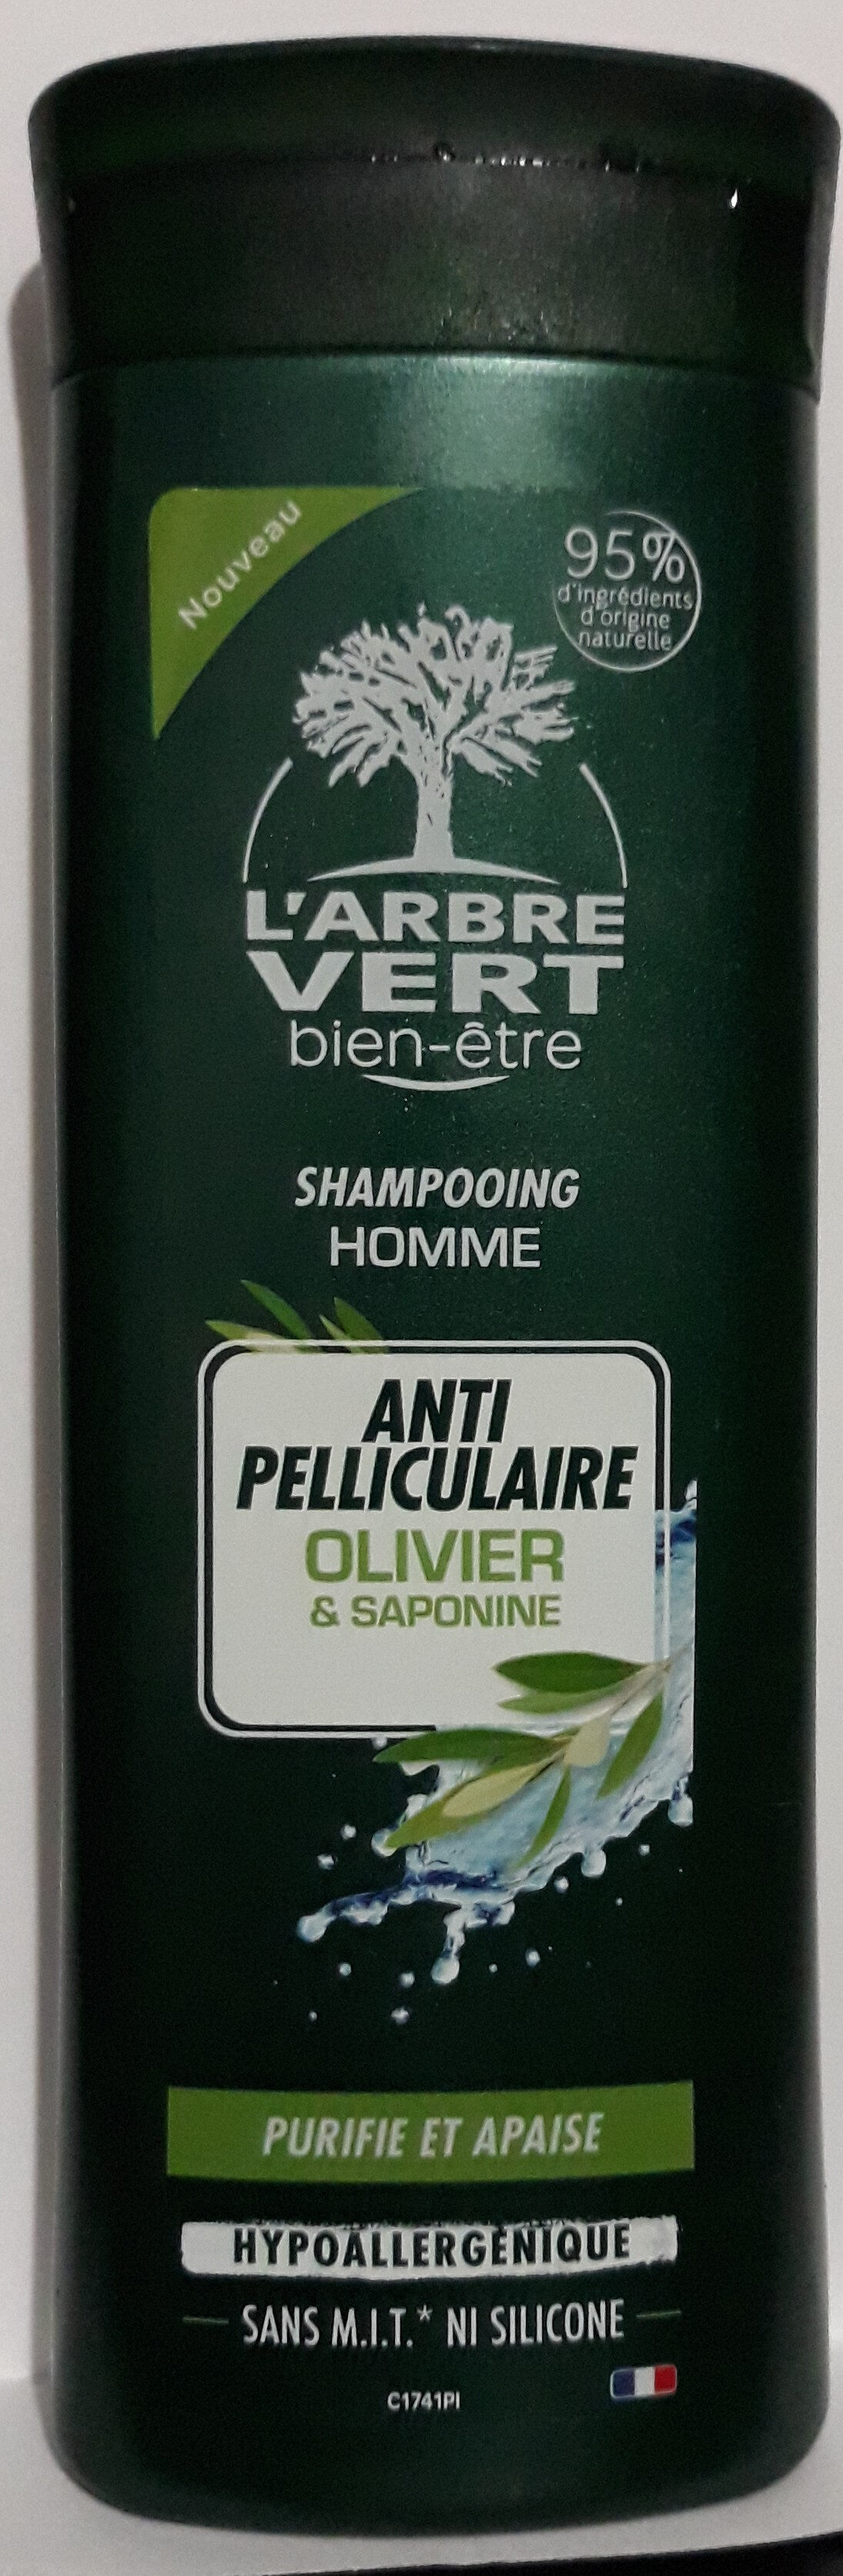 shampooing homme anti pelliculaire olivier & saponine - Tuote - fr